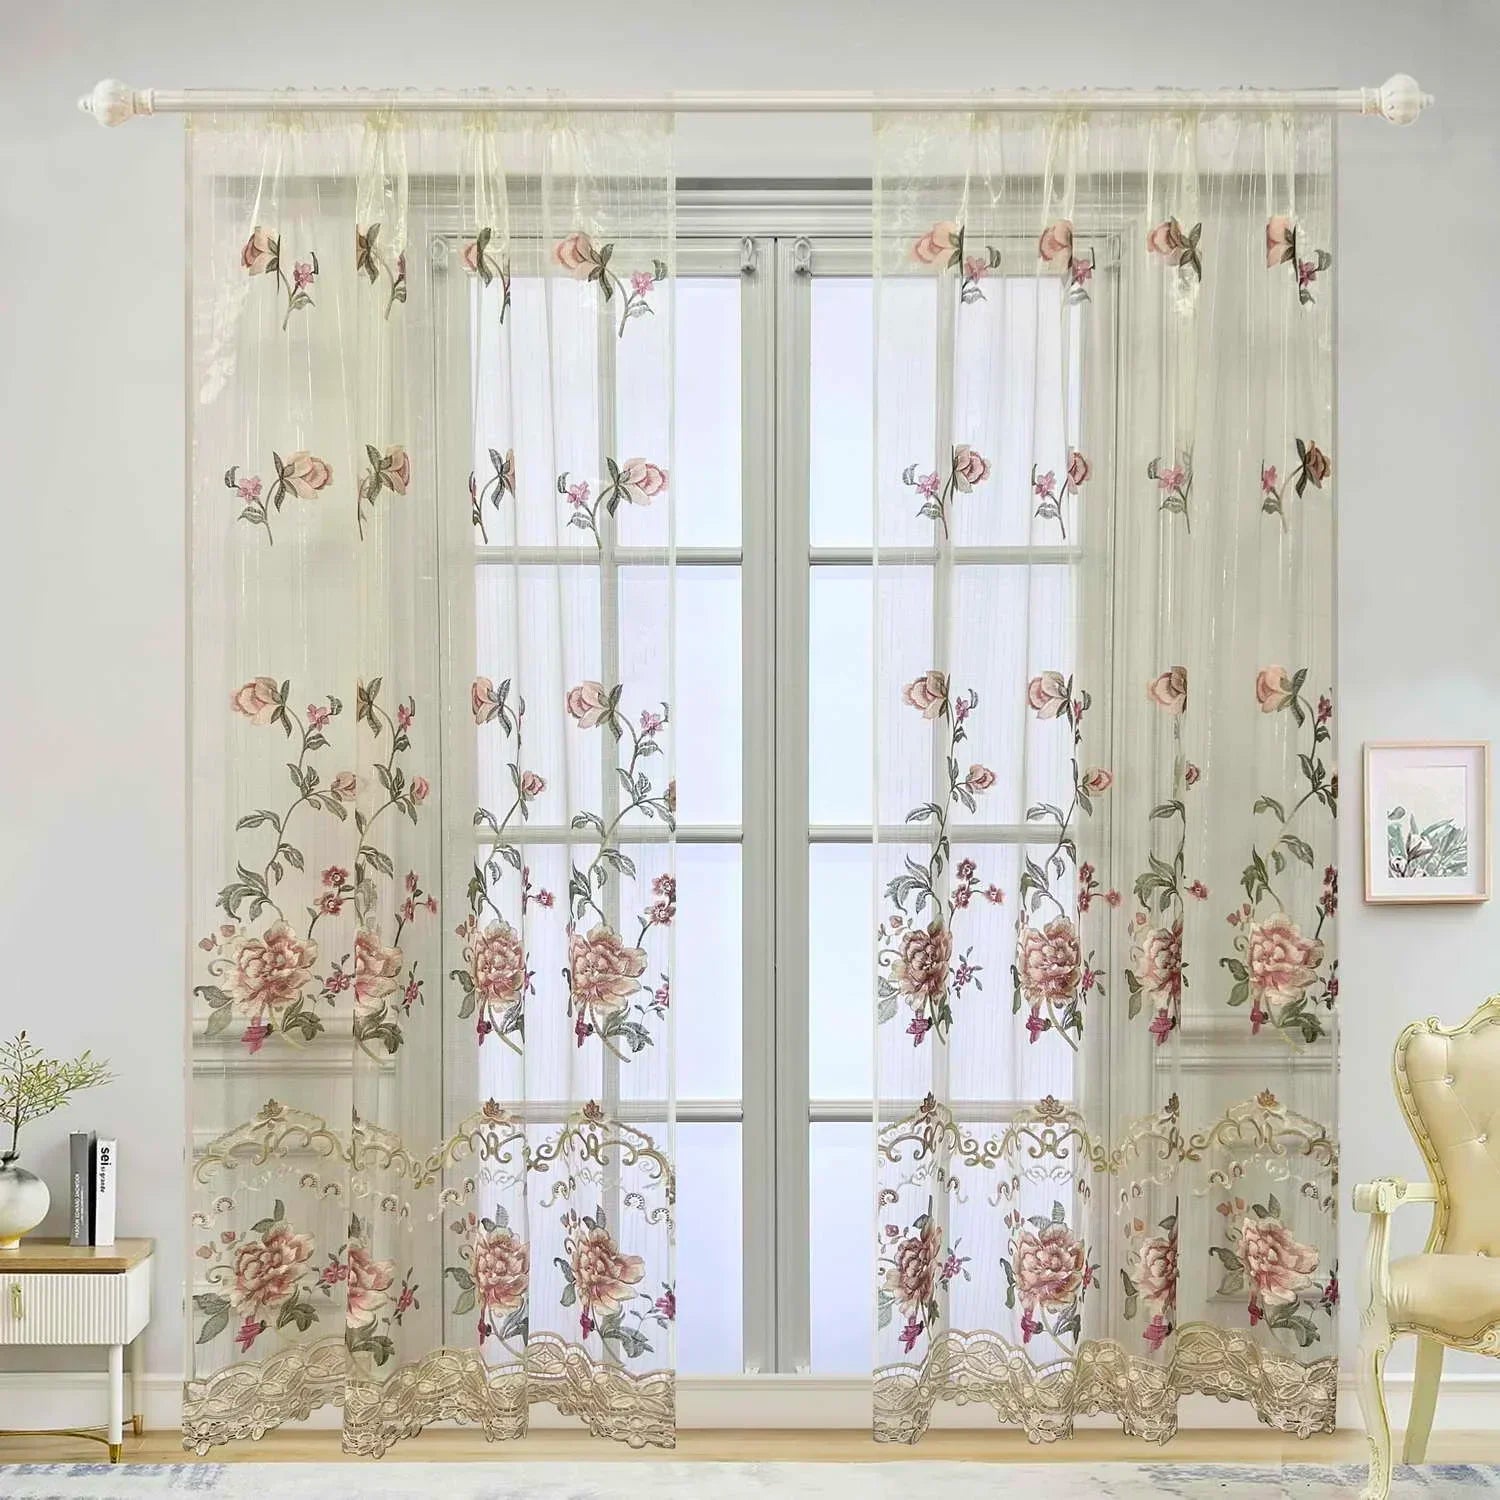 Rustic European Luxury Shiny Gold Thread Embroidery Floral Sheer Curtains for LivingRoom Bedroom Window Treatment Rod Pocket Top